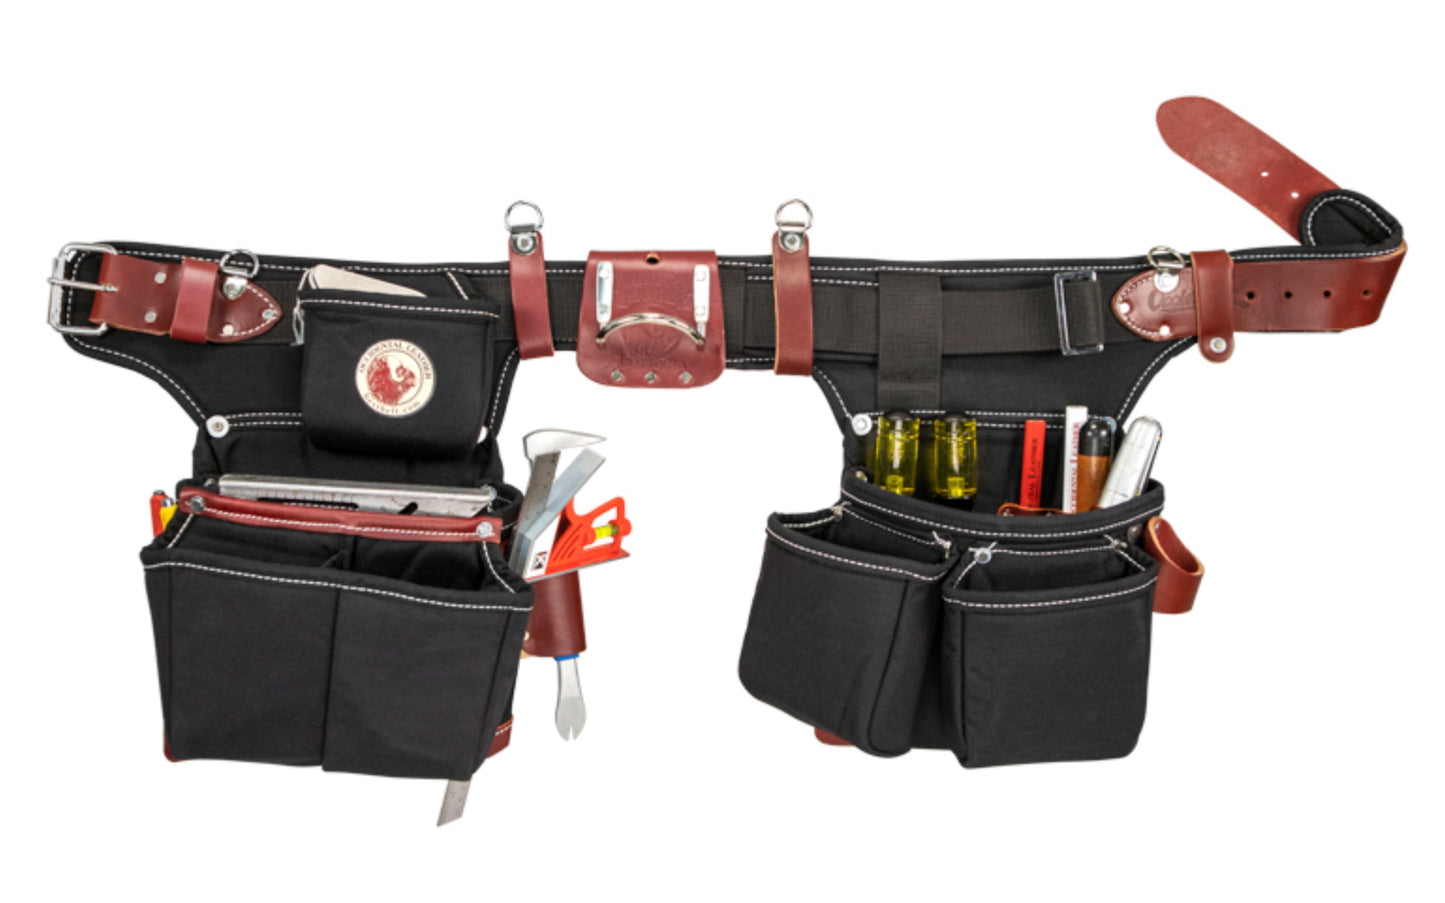 Occidental Leather Heritage "Adjust-To-Fit" OxyLights Framer Tool Belt Package Set ~ 9515 - Padded Two Ply Tool Bags Keep Shape - 21 pockets - Fully Adjustable - Contracts to 32” Pant (35” Belt), Expands to 41” Pant (45” Belt). 759244210507. Extremely Abrasion Resistant Industrial Nylon material - Belt Set. Made in USA